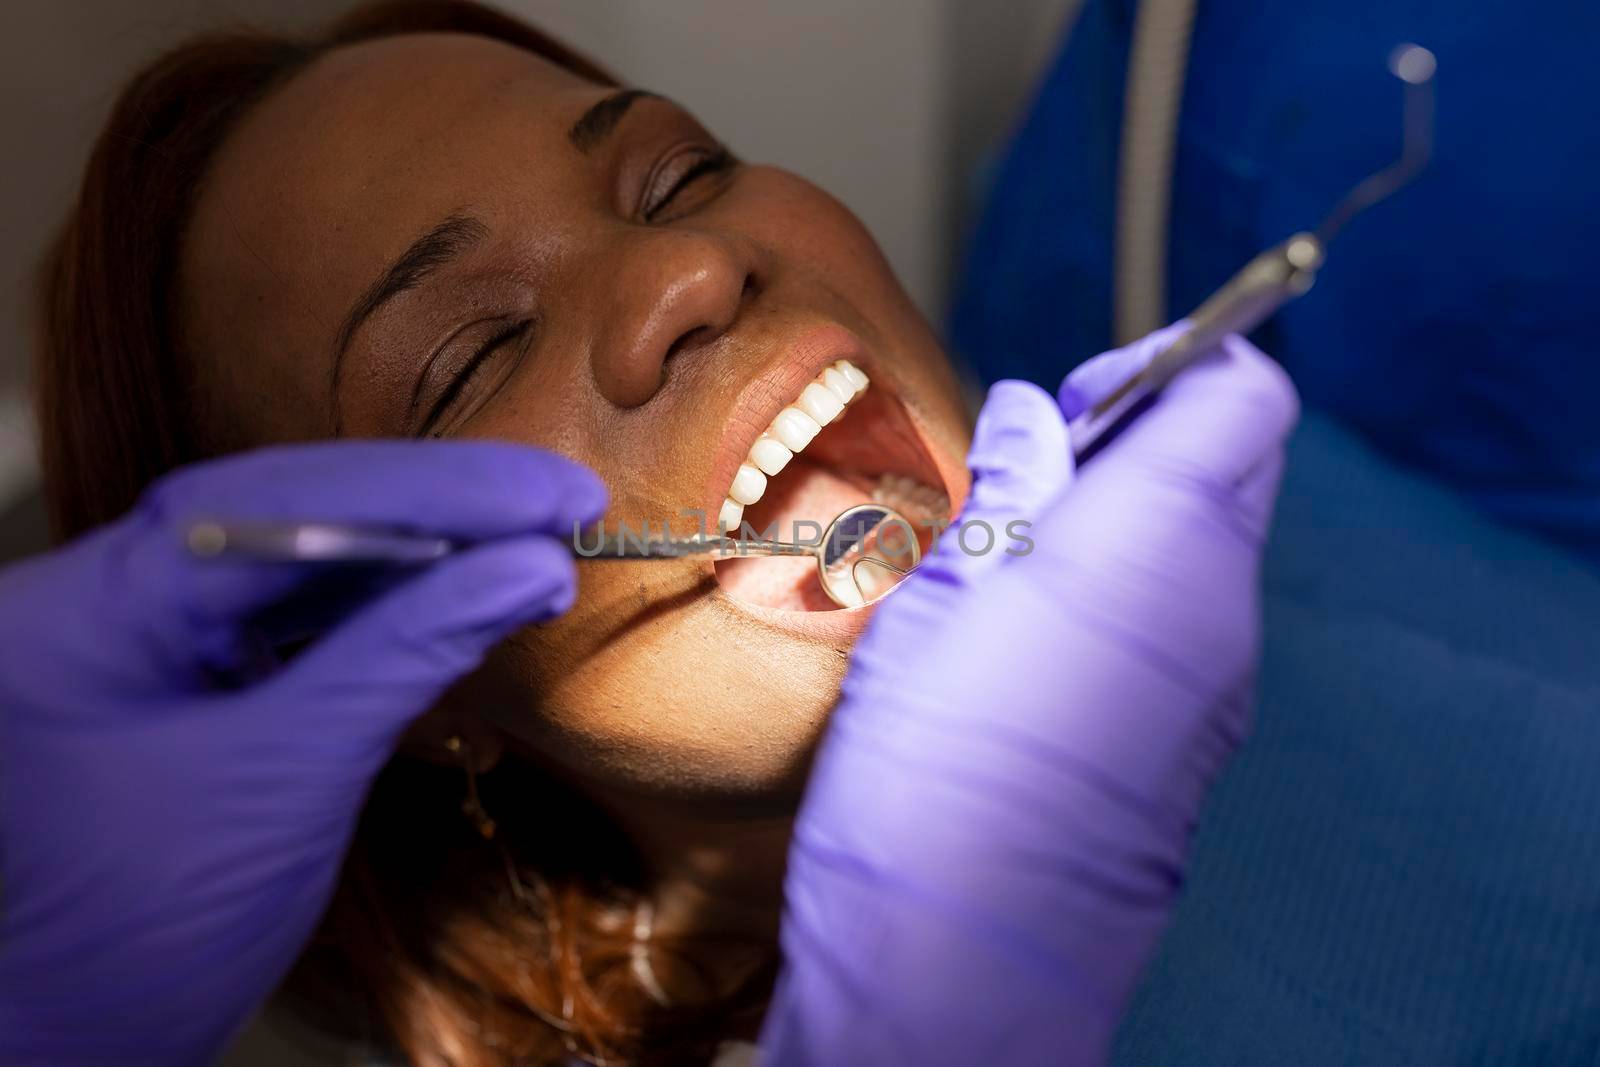 A dentist woman's hands using dental tools with a client at the dental clinic by stockrojoverdeyazul